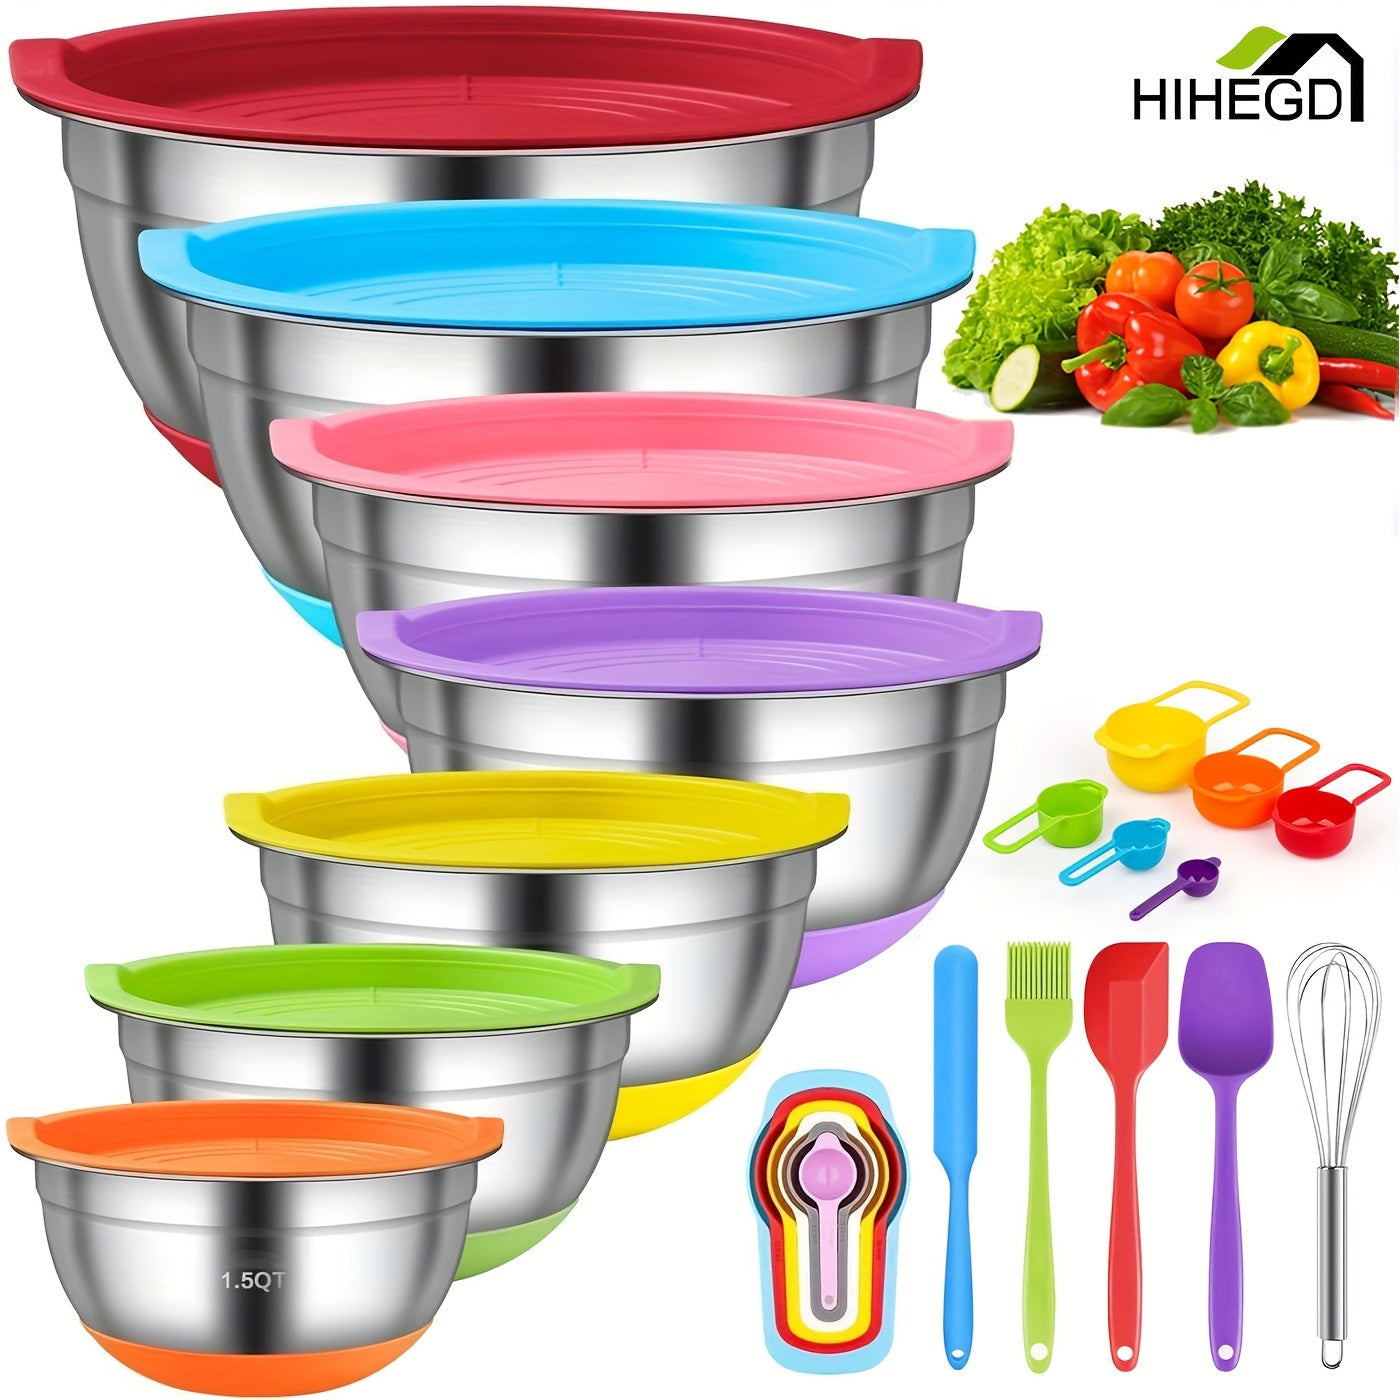 18pcs, Mixing Bowls With Airtight Lids, Stainless Steel Nesting Colorful Mixing Bowls Set With Non-slip Silicone Bottom, Size 7, 5.5, 4, 3.5, 2.5, 2, 1.5 Qt, Fit For Mixing & Serving